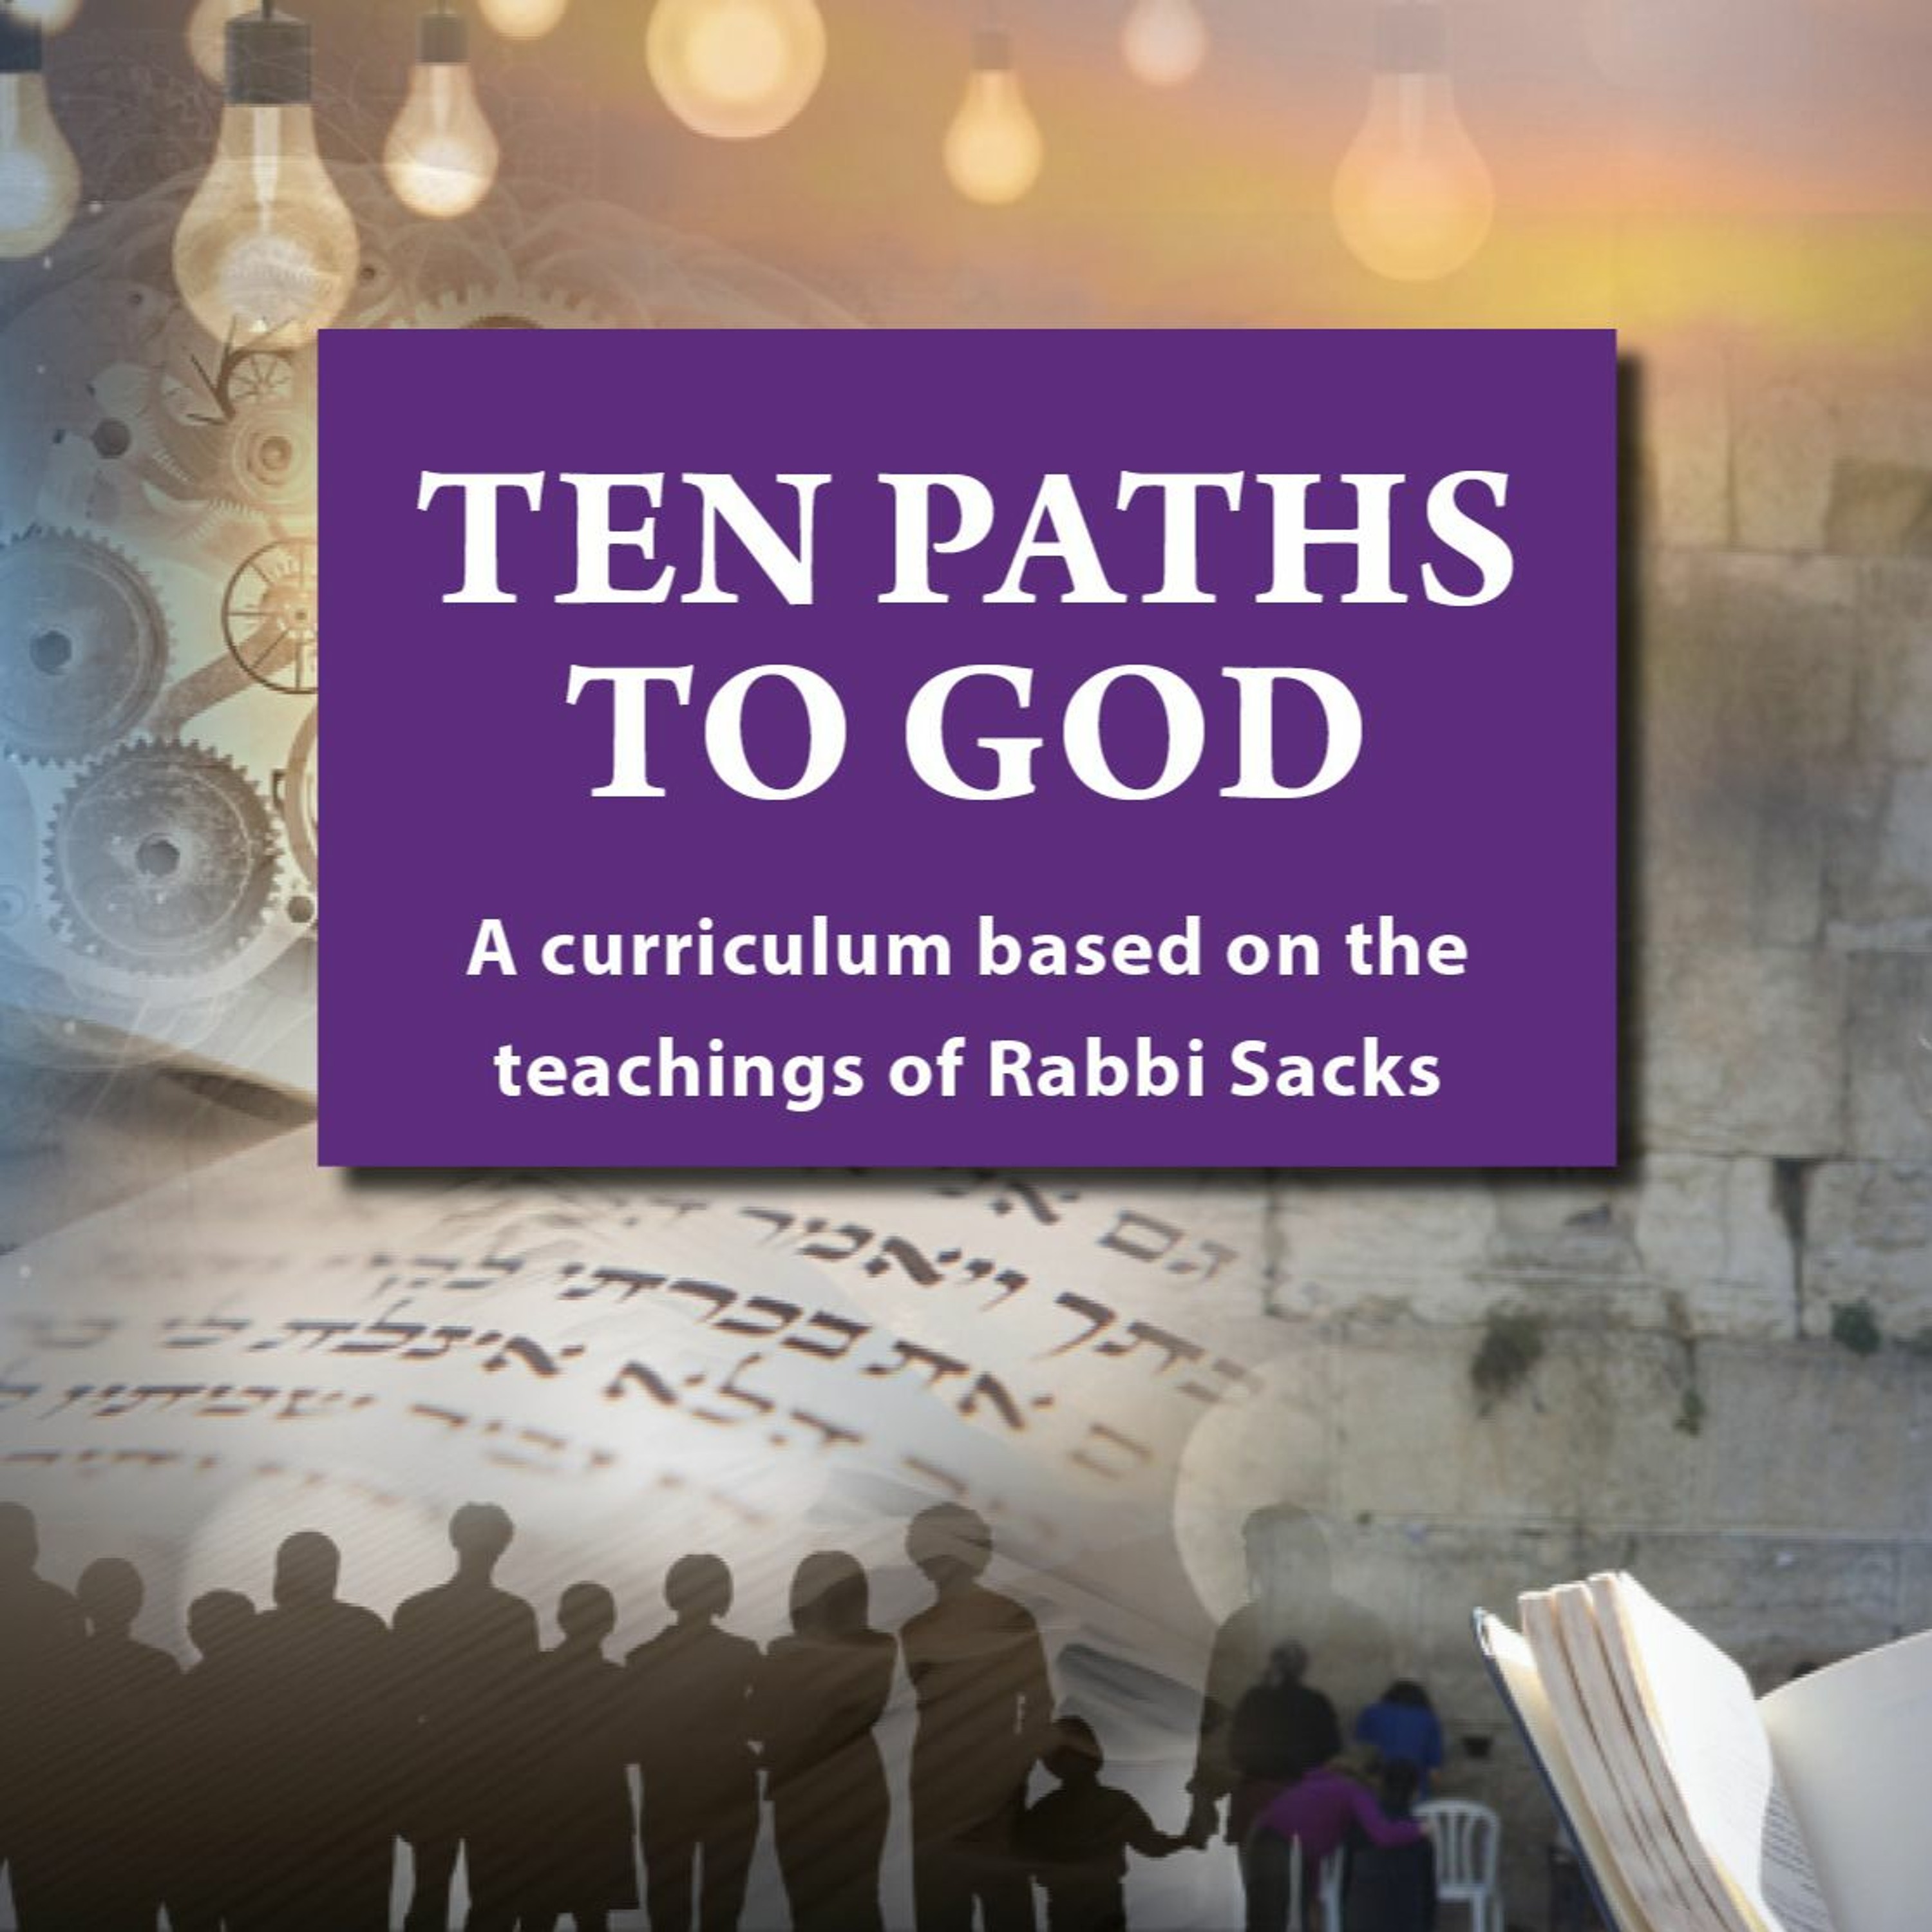 The Way Of Identity On Being A Jew (Ten Paths To God - Unit 1)